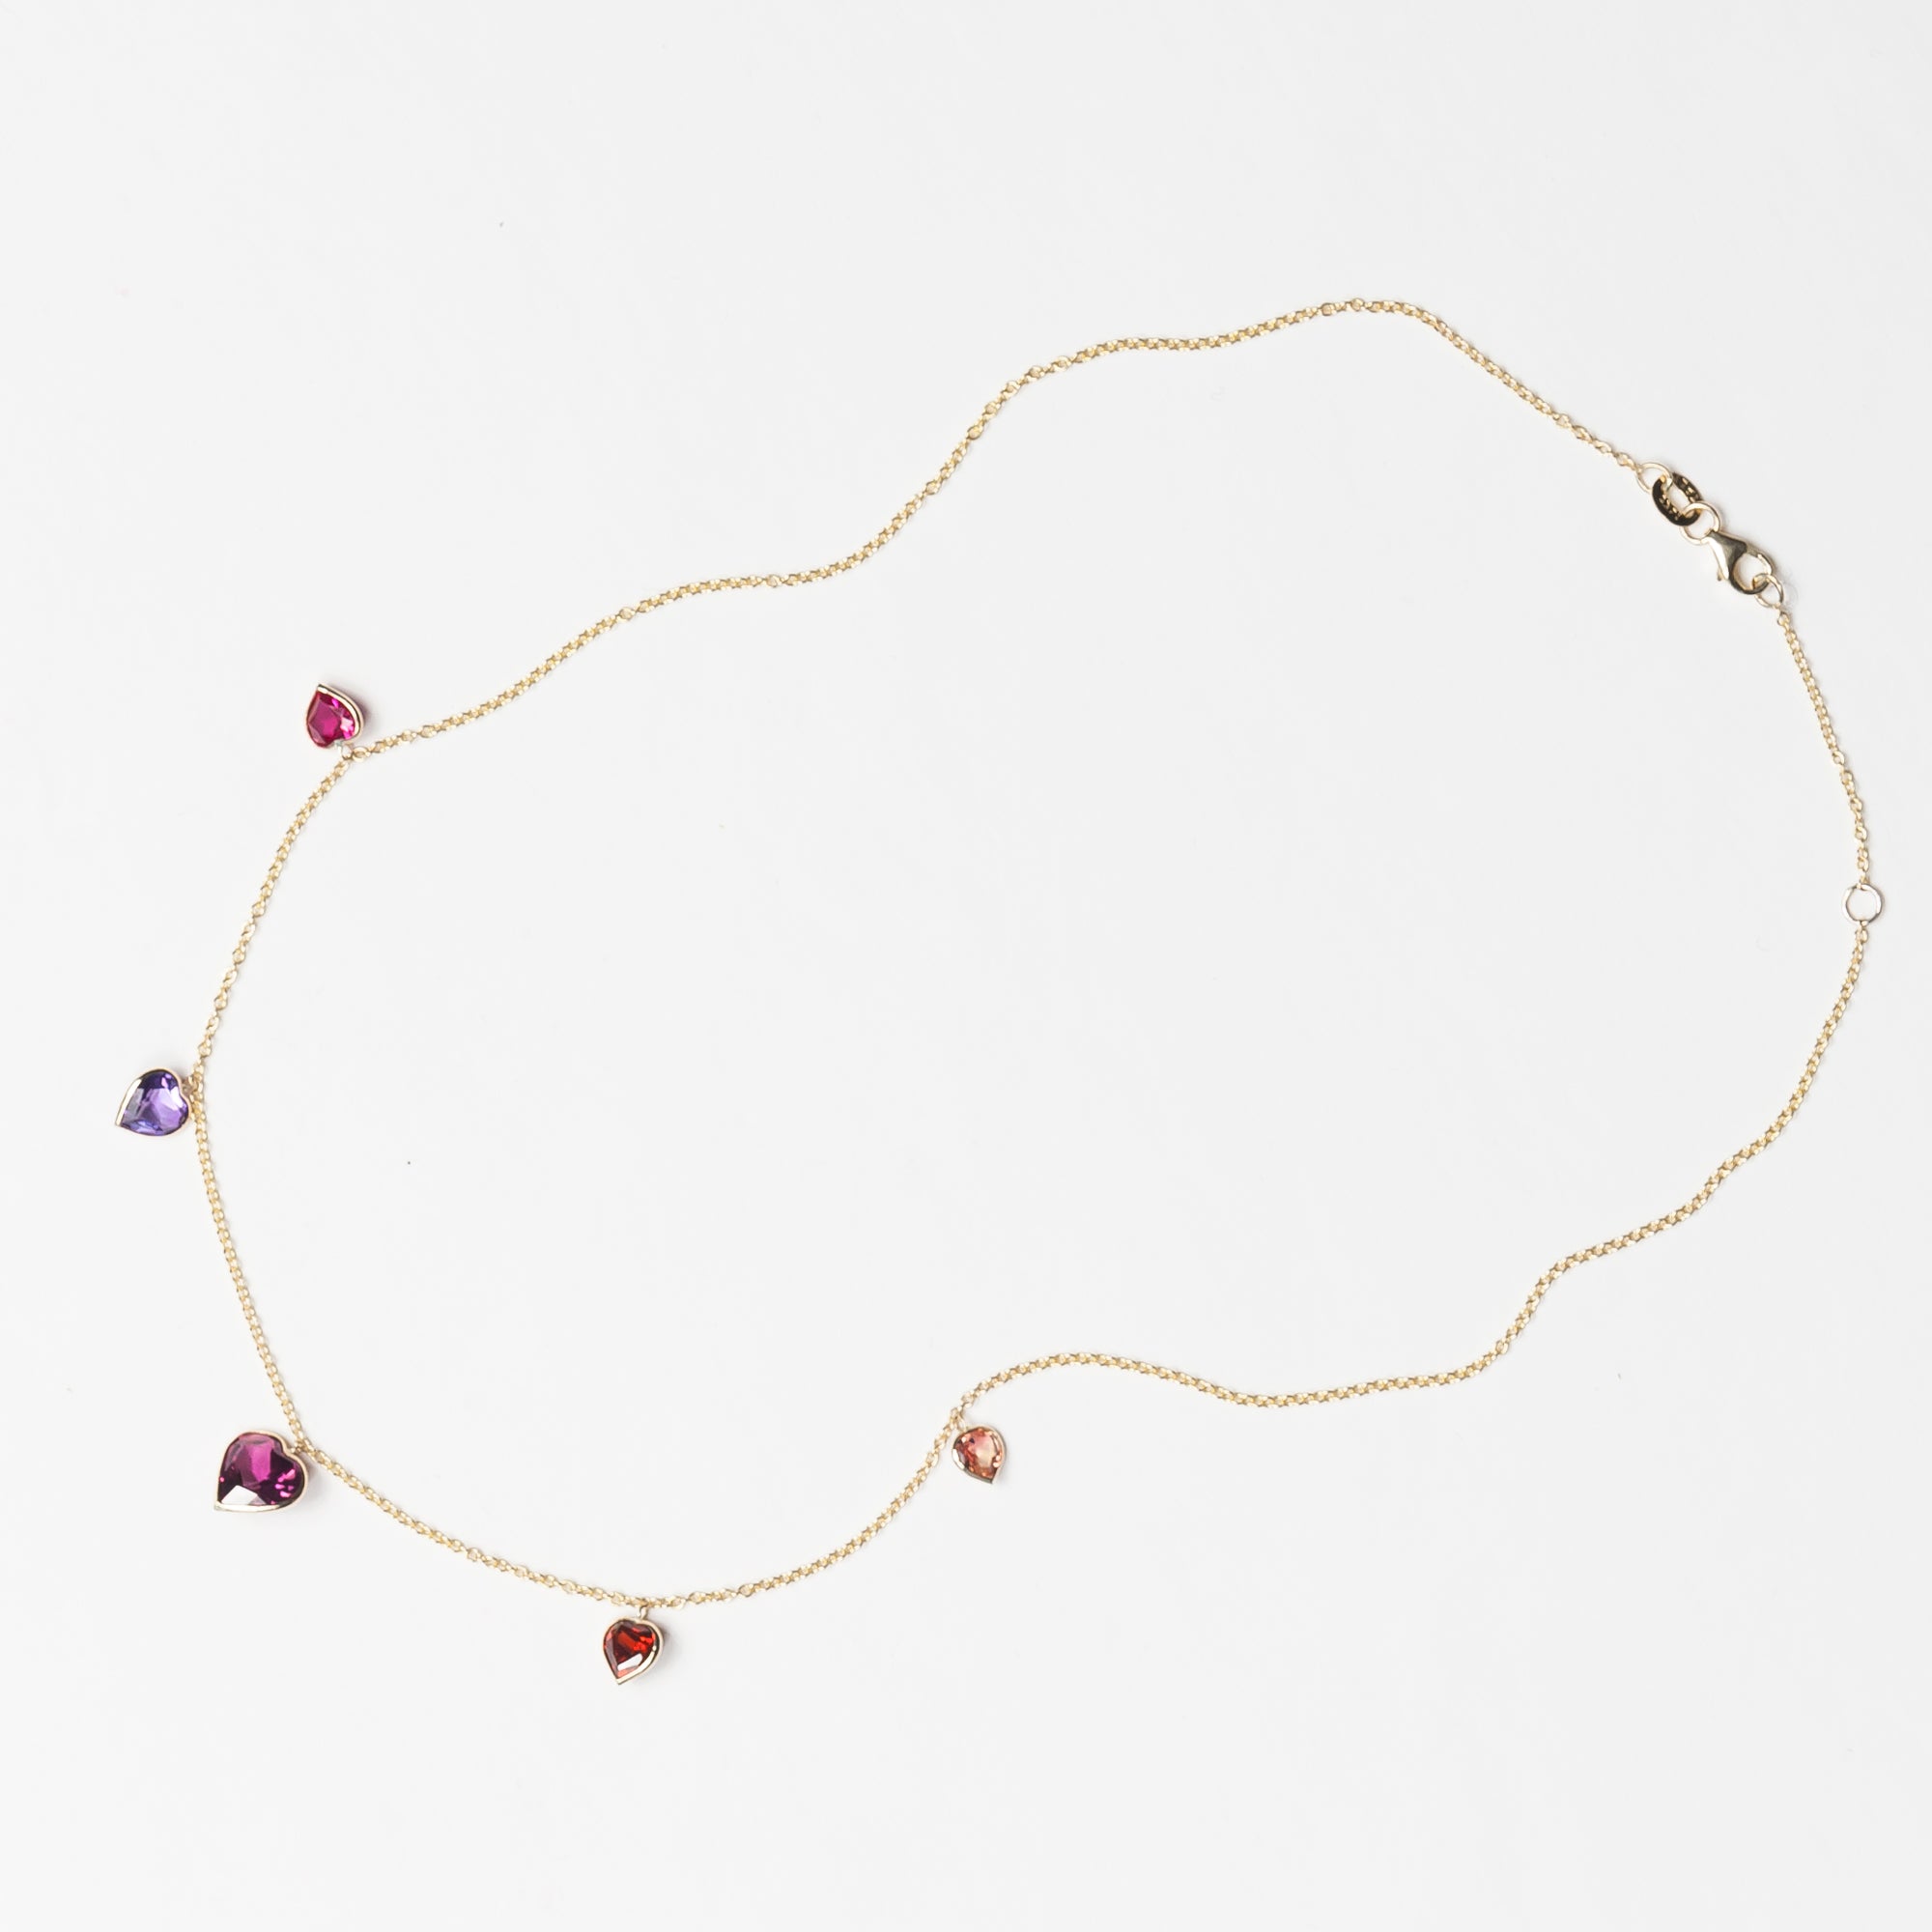 A delicate necklace from a collection of heart shaped gemstones. 